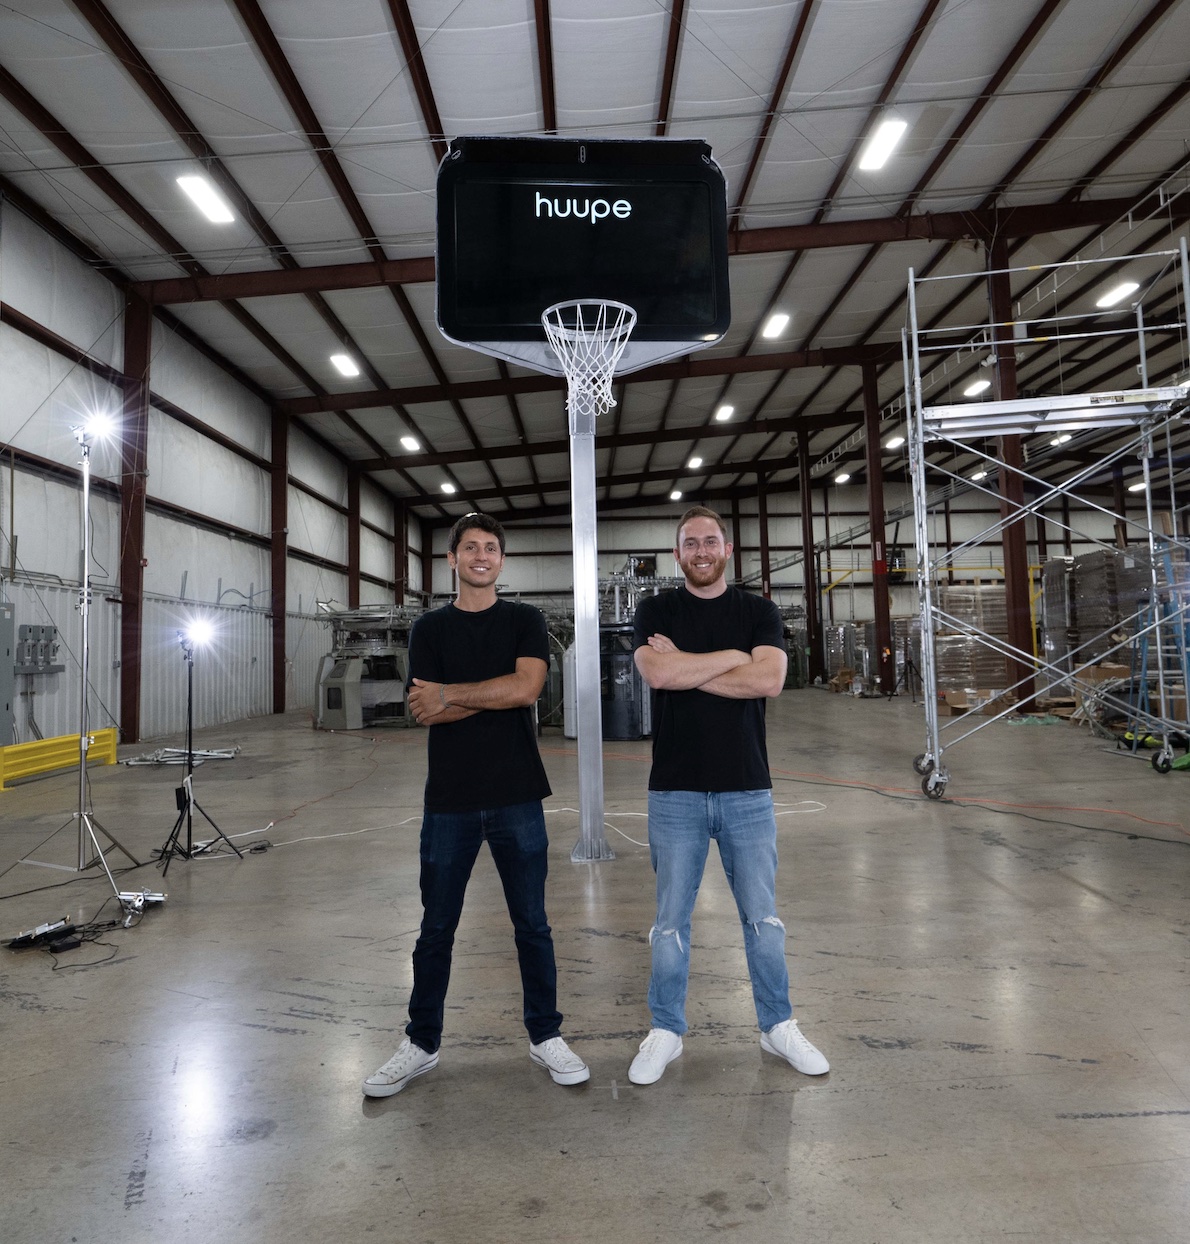 Huupe, a smart basketball hoop startup, raises its game with $11M